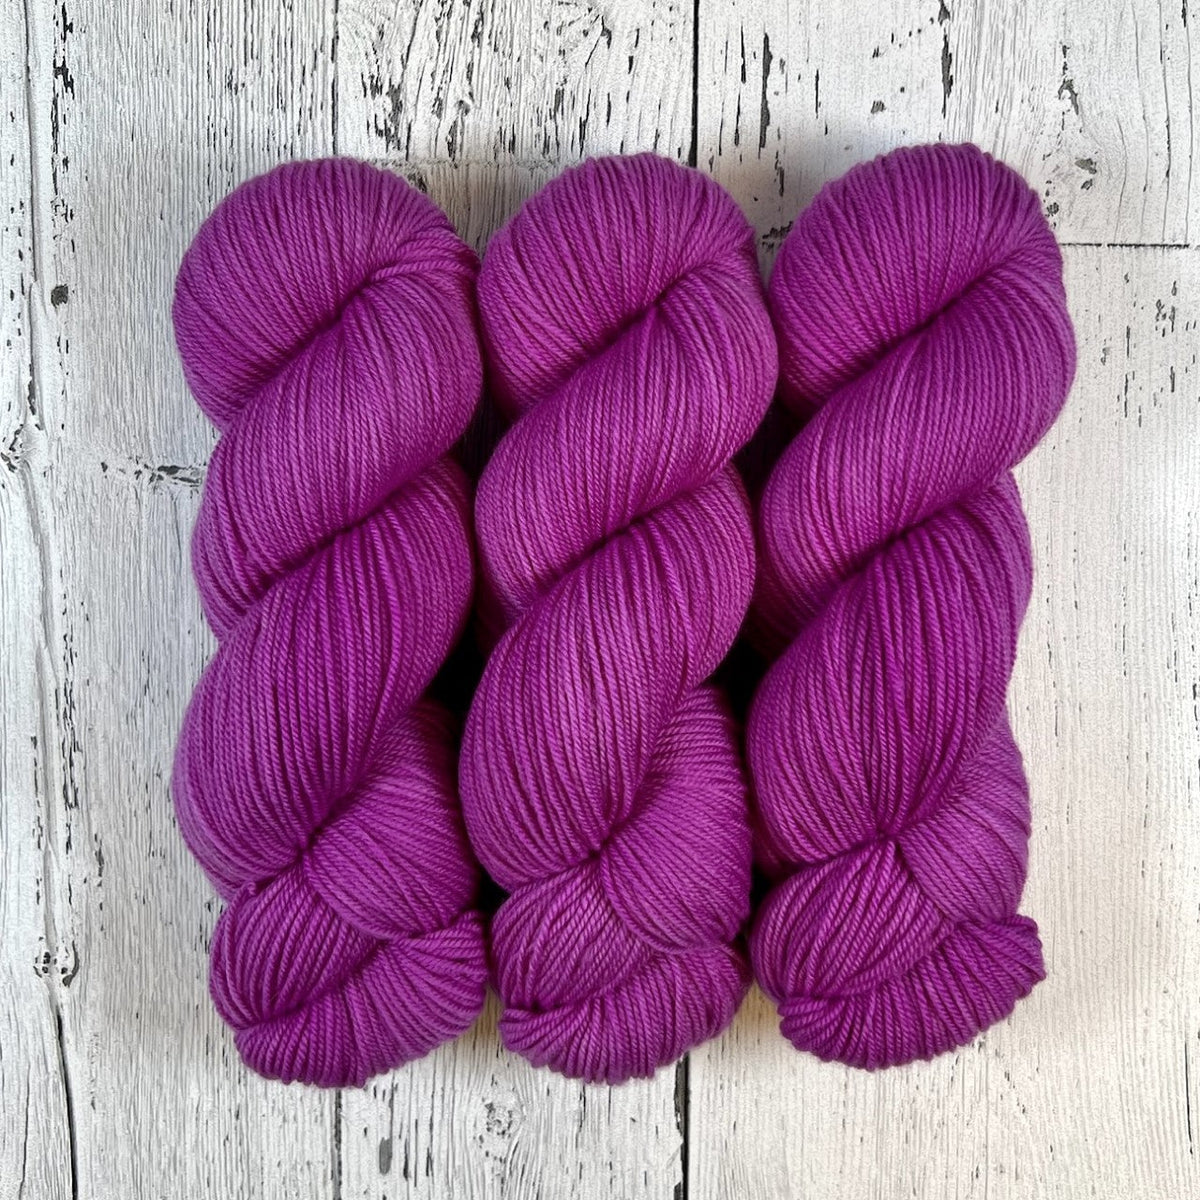 Clematis - Nettle Soft DK - Dyed Stock